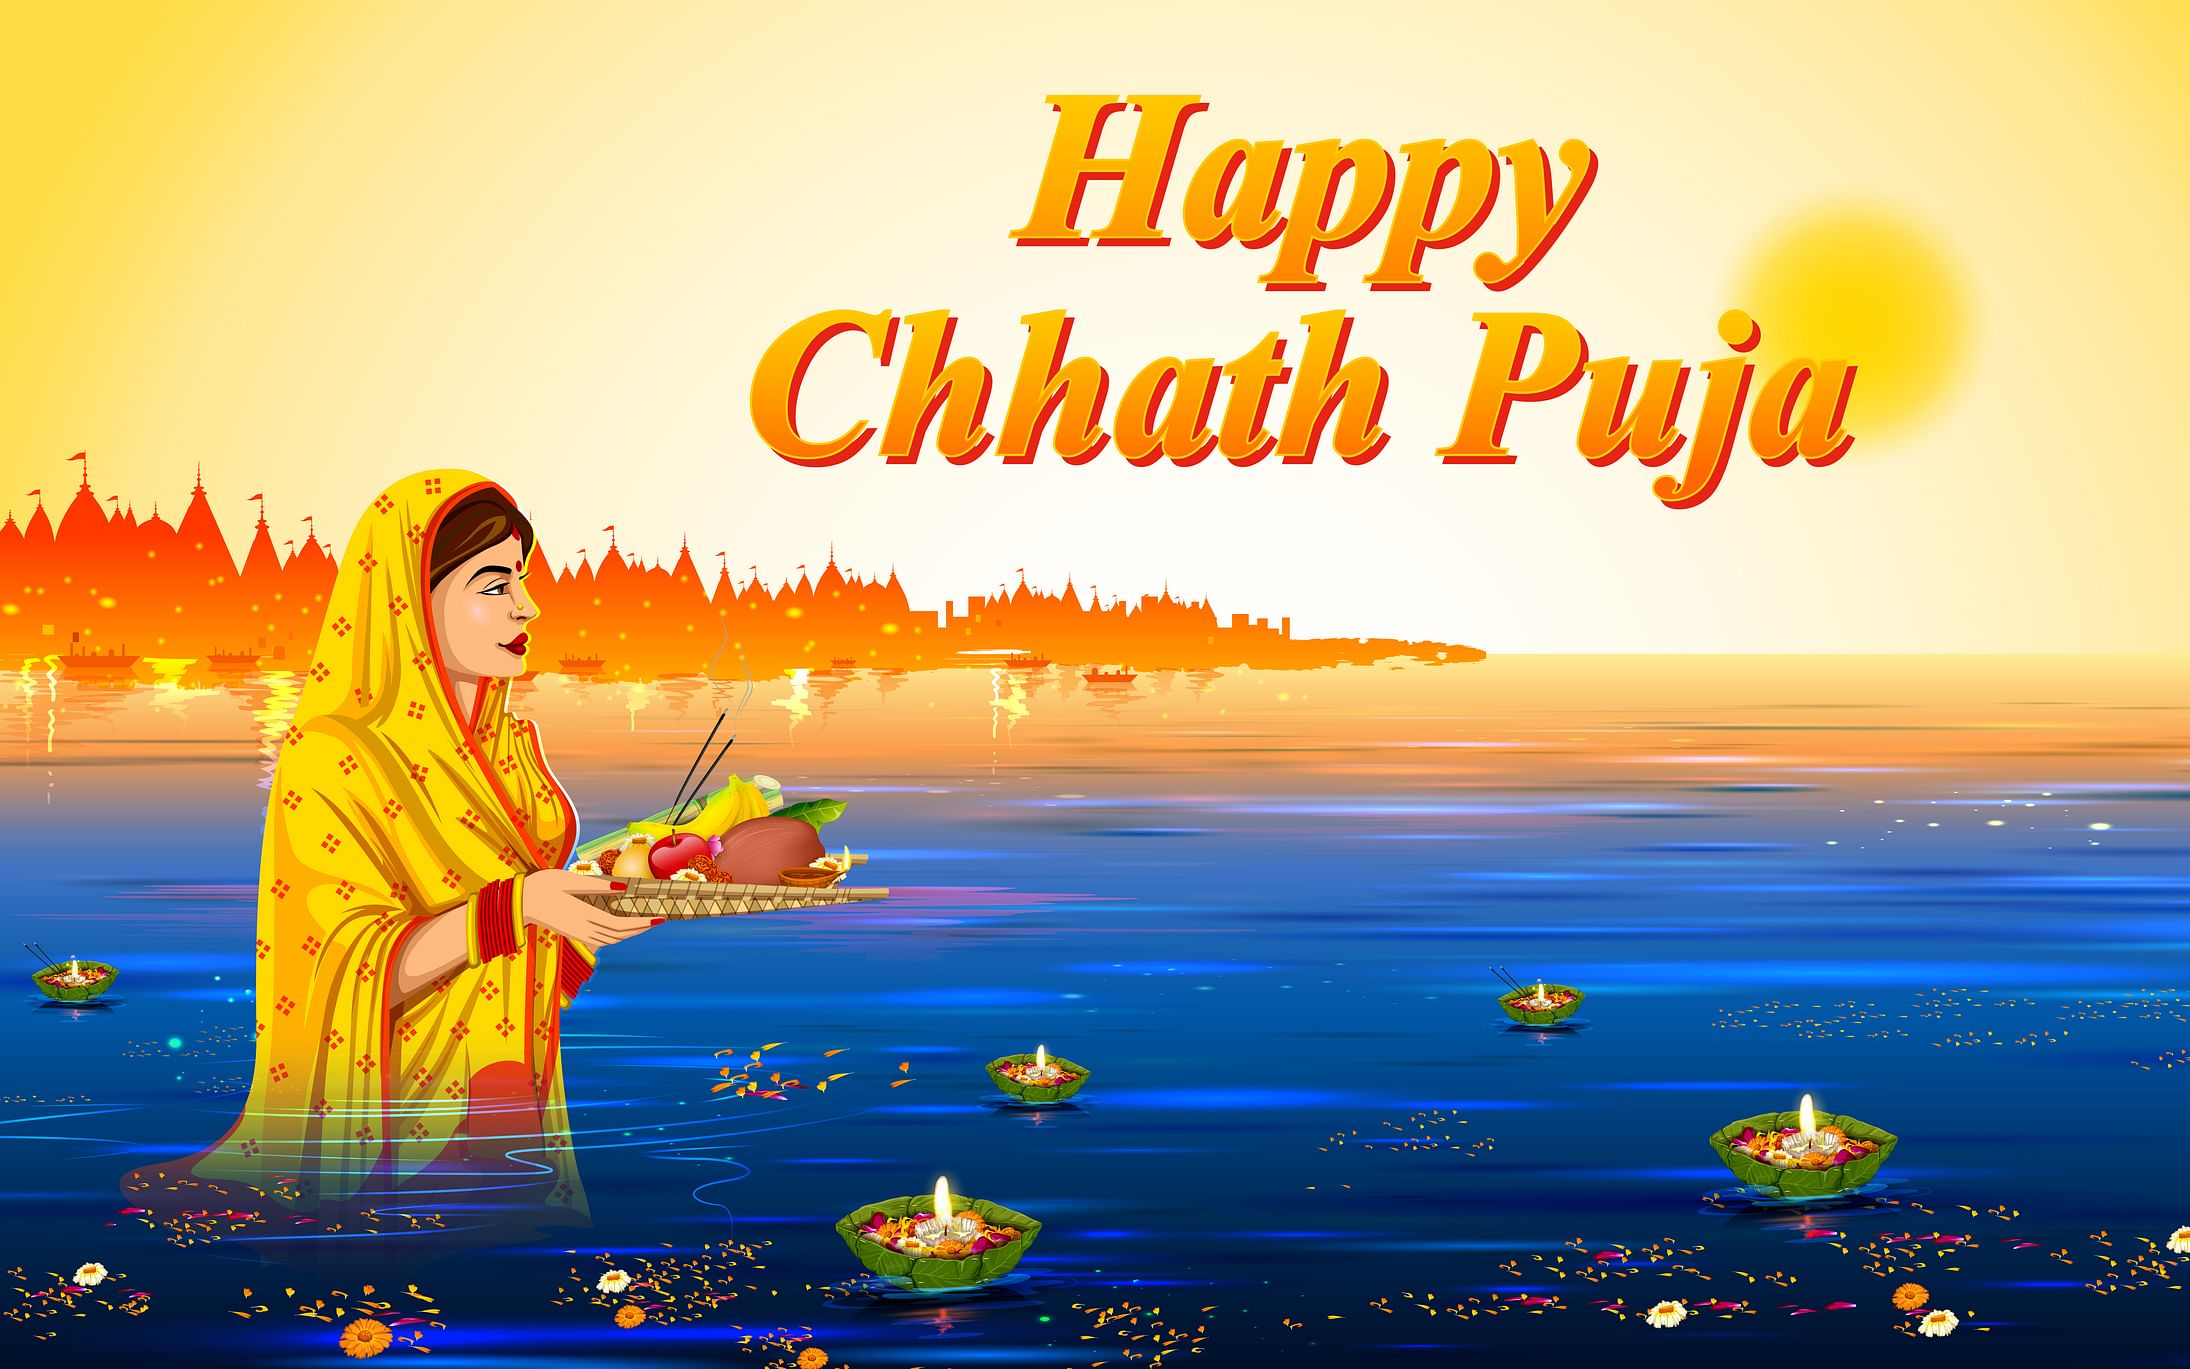 Chhath Puja Happy Wishes Quotes